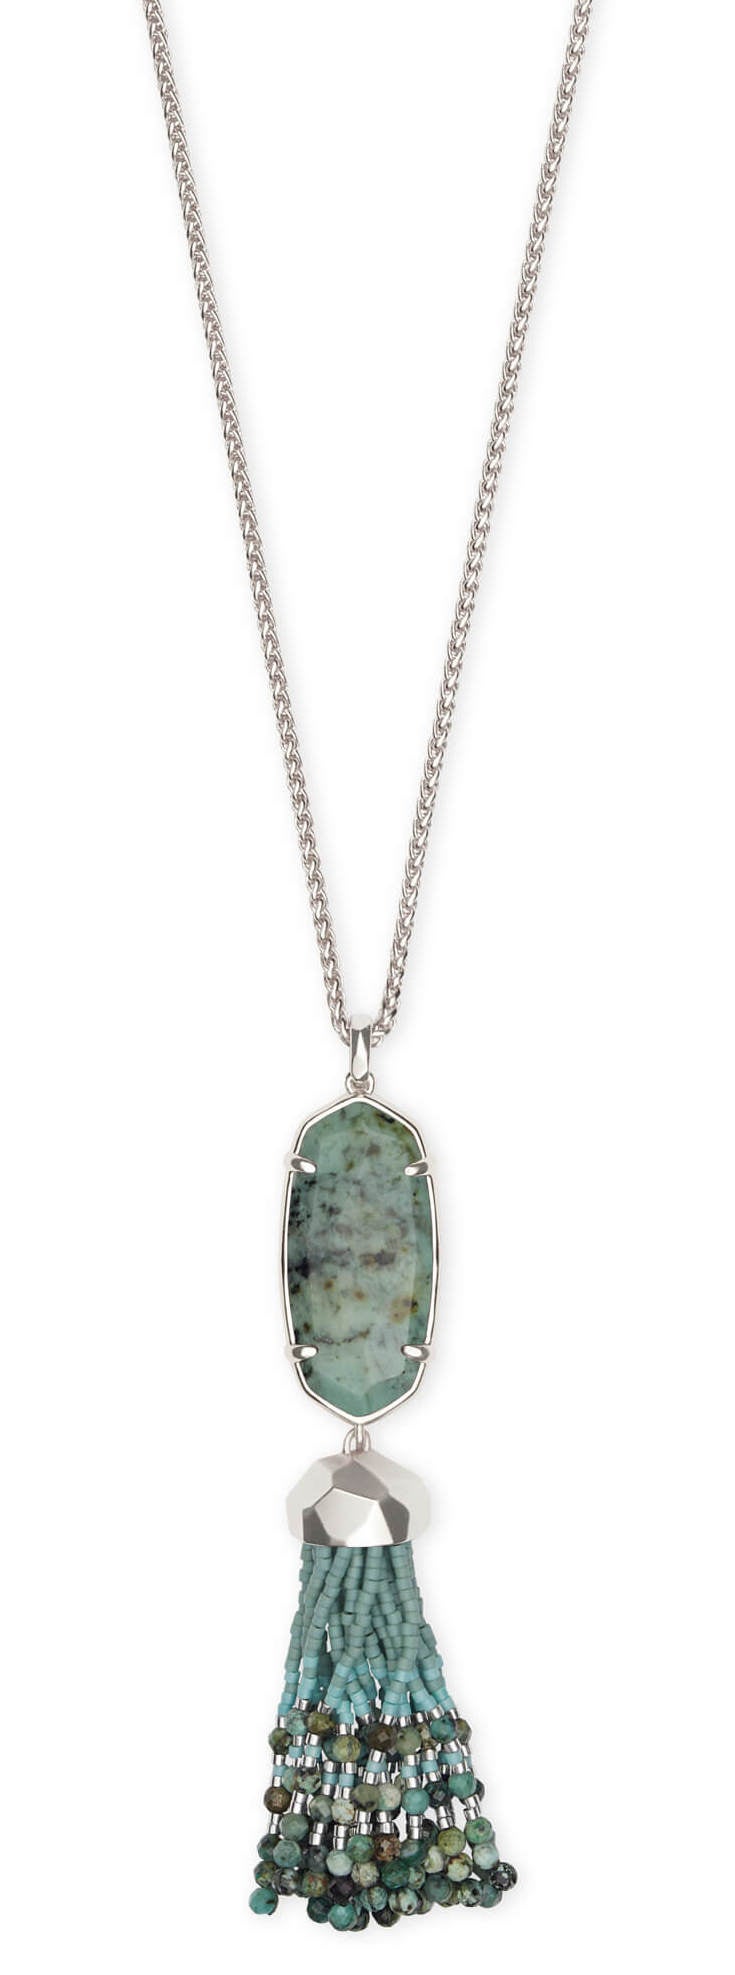 Eva Silver Long Pendant Necklace In African Turquoise